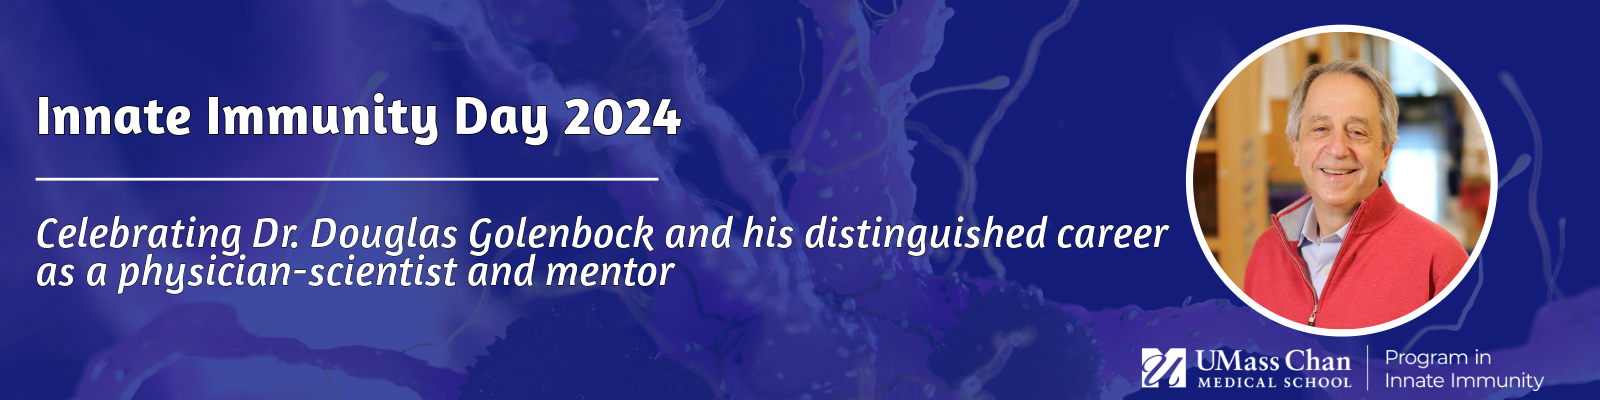 Meeting banner for Innate Immunity Day 2024 Celebrating Dr. Douglas Golenbock and his distinguished career as a physician scientist and mentor